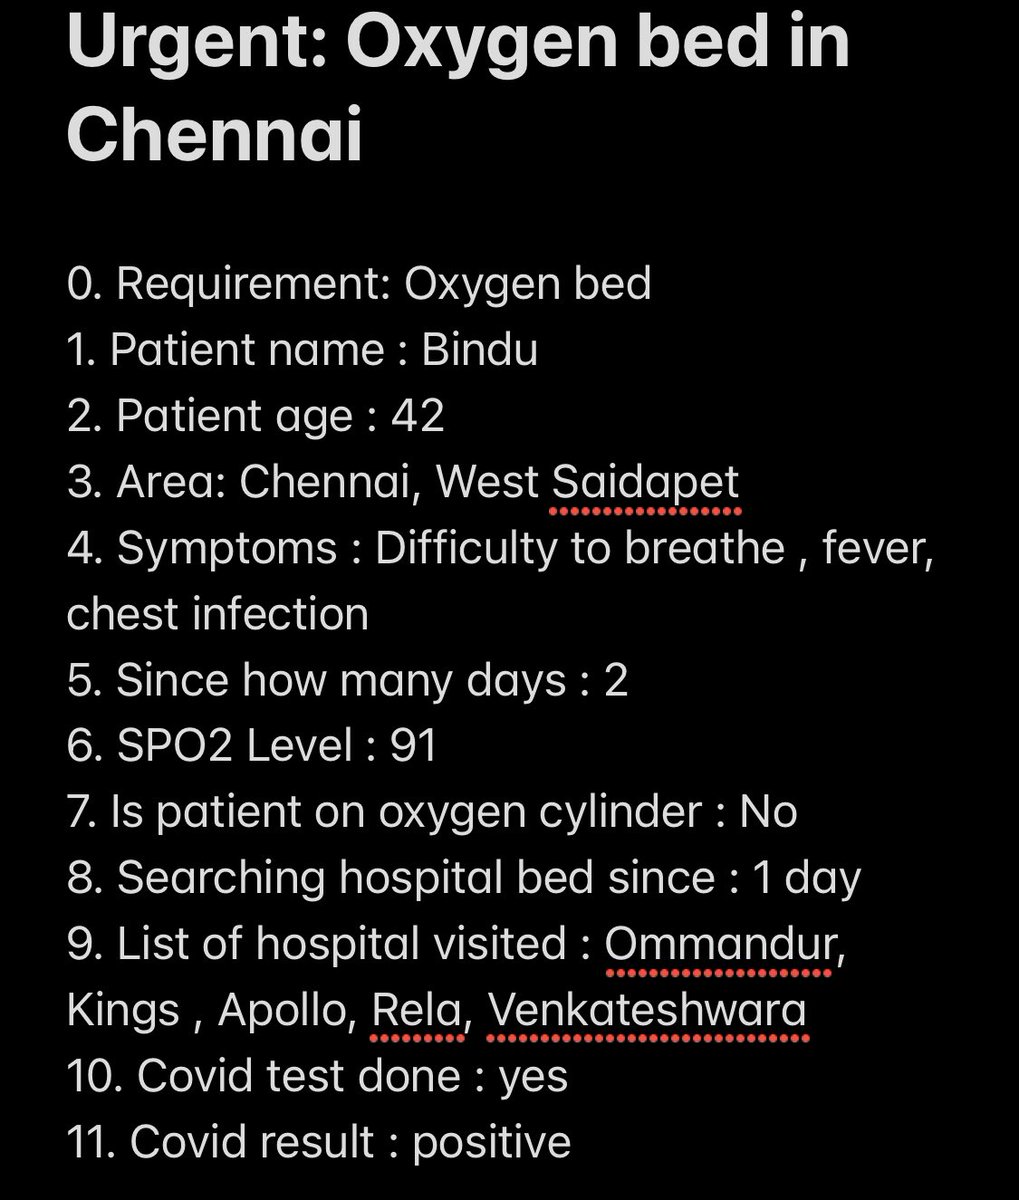 Need an #OxygenBed in #Chennai for a family member. 

Any verified leads are appreciated, please DM me. 

We have tried several hospitals already and are trying helplines meanwhile. Thank you! 

#COVID19India #CovidHelp #TamilNadu 

Patient details below ⬇️